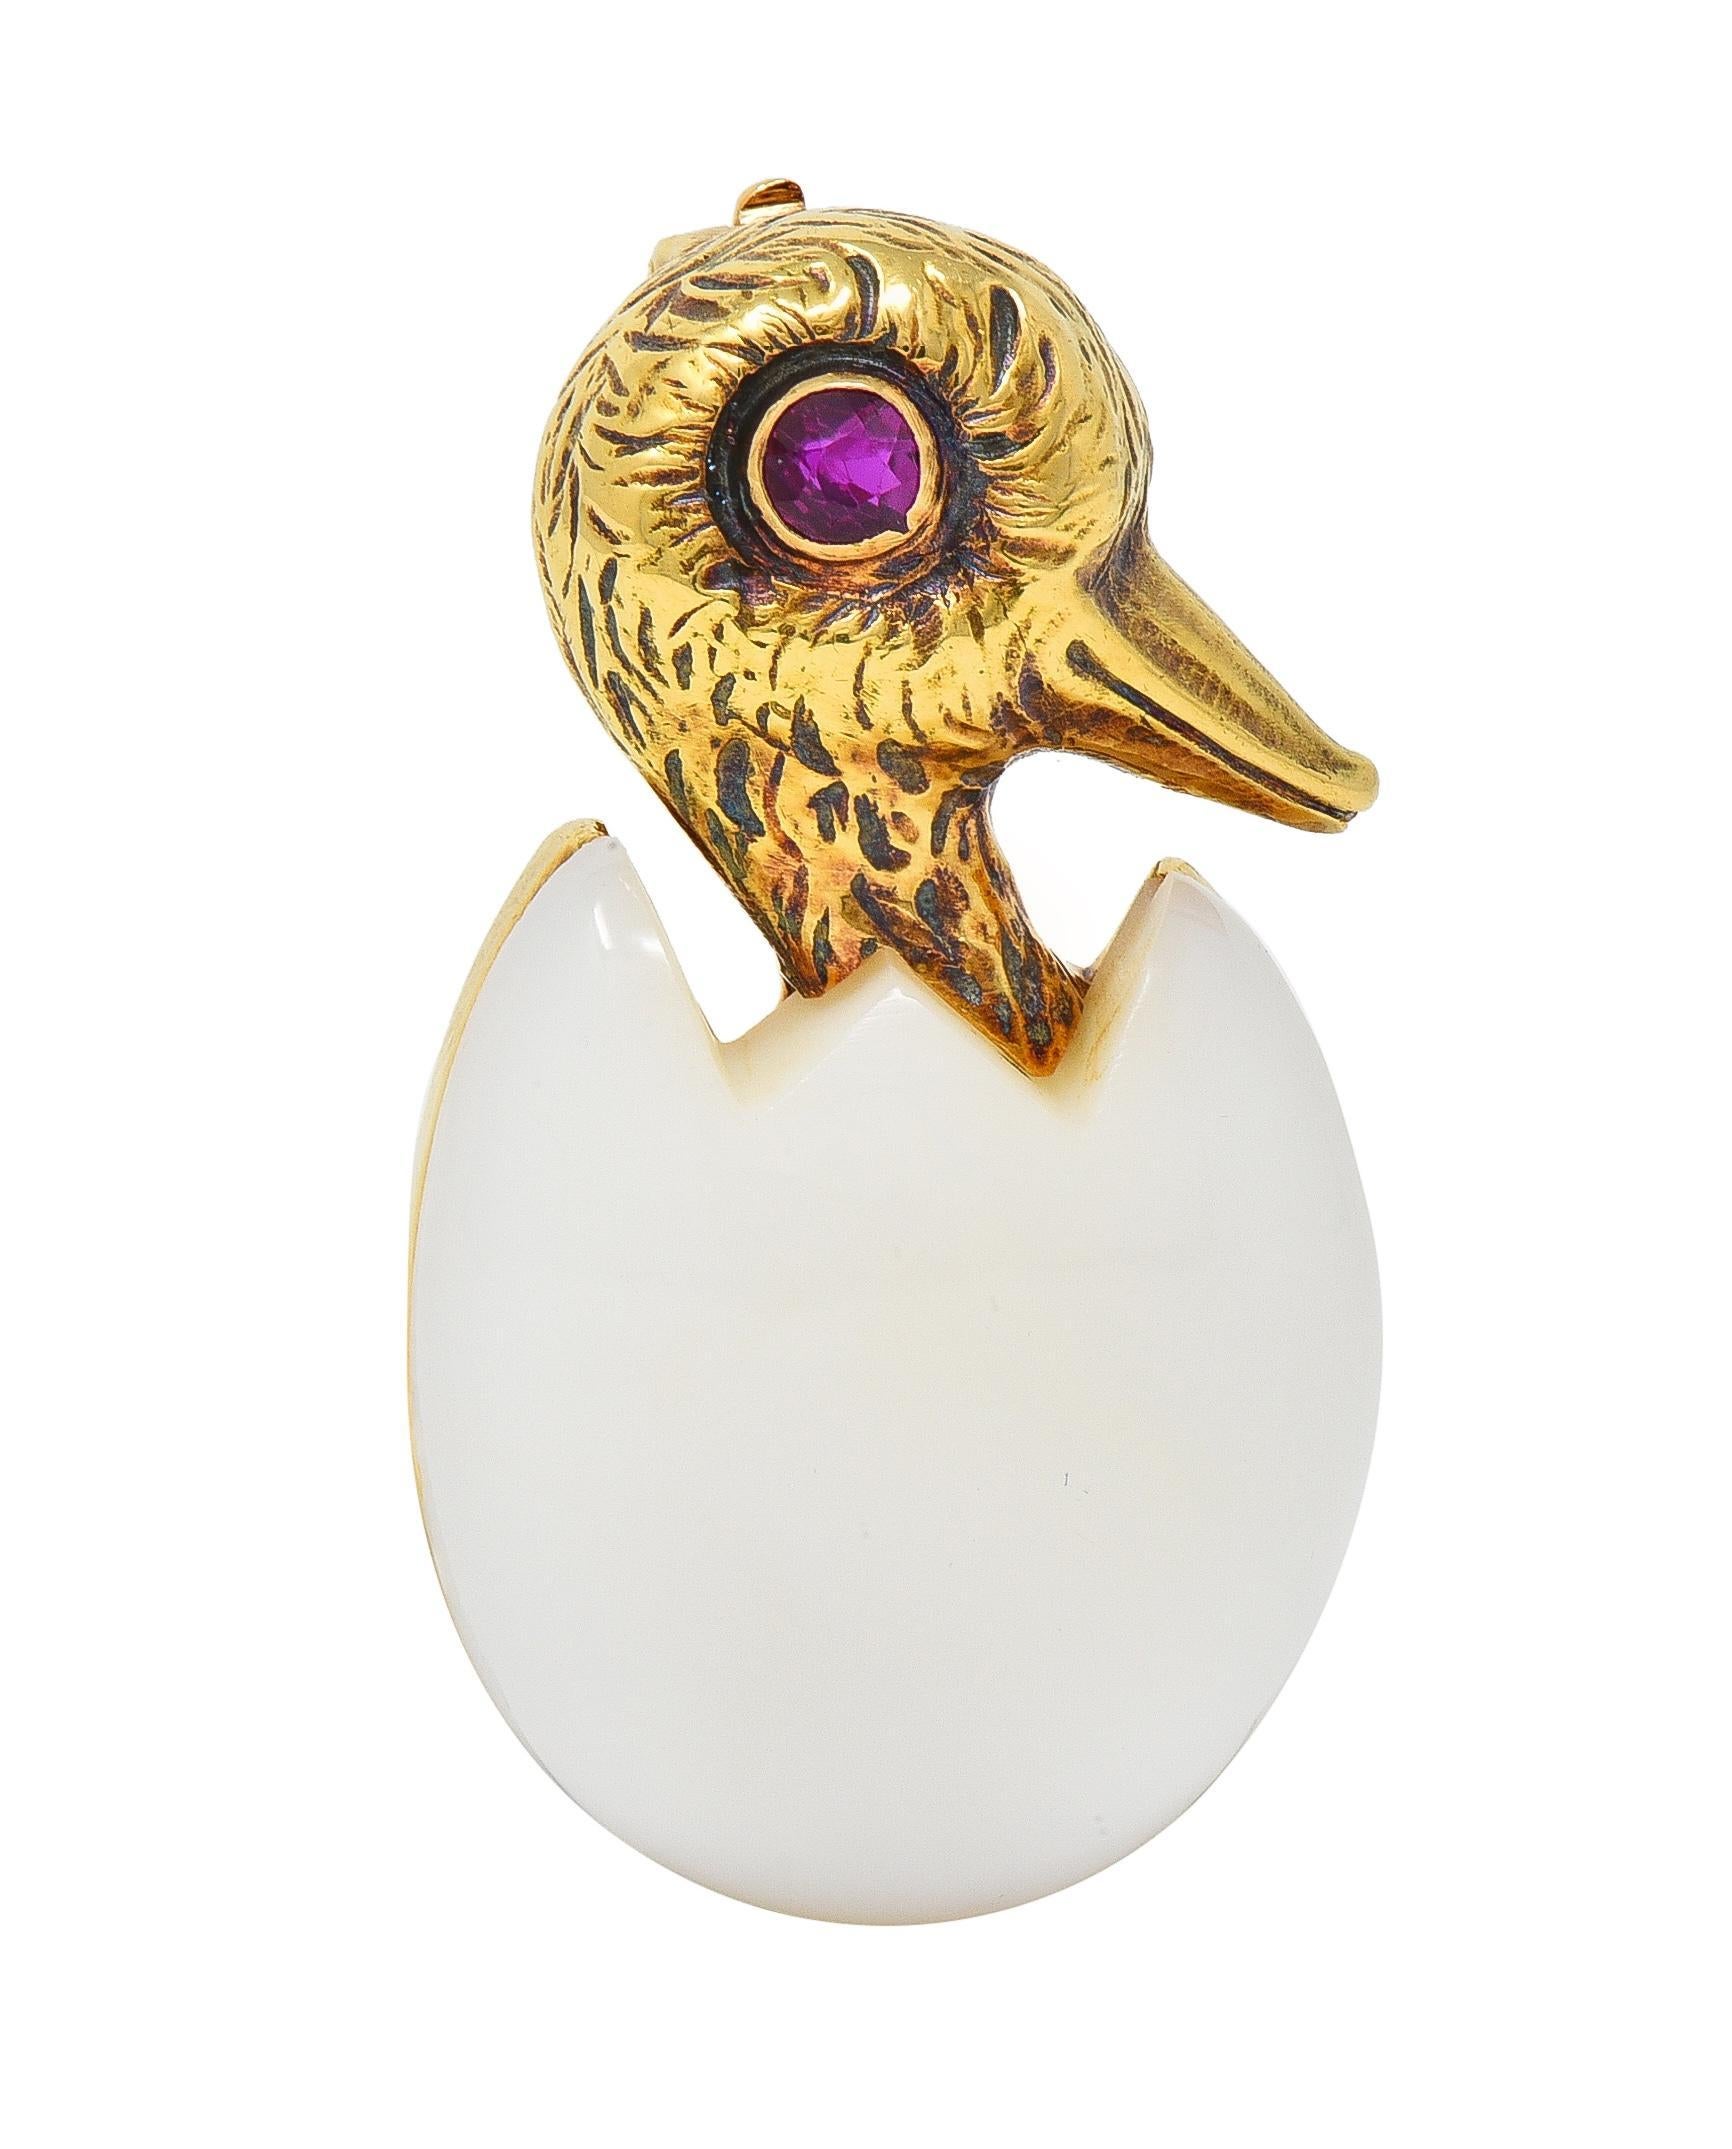 Cartier France 1960's Ruby Chalcedony 18 Karat Yellow Gold Hatching Bird Brooch For Sale 8